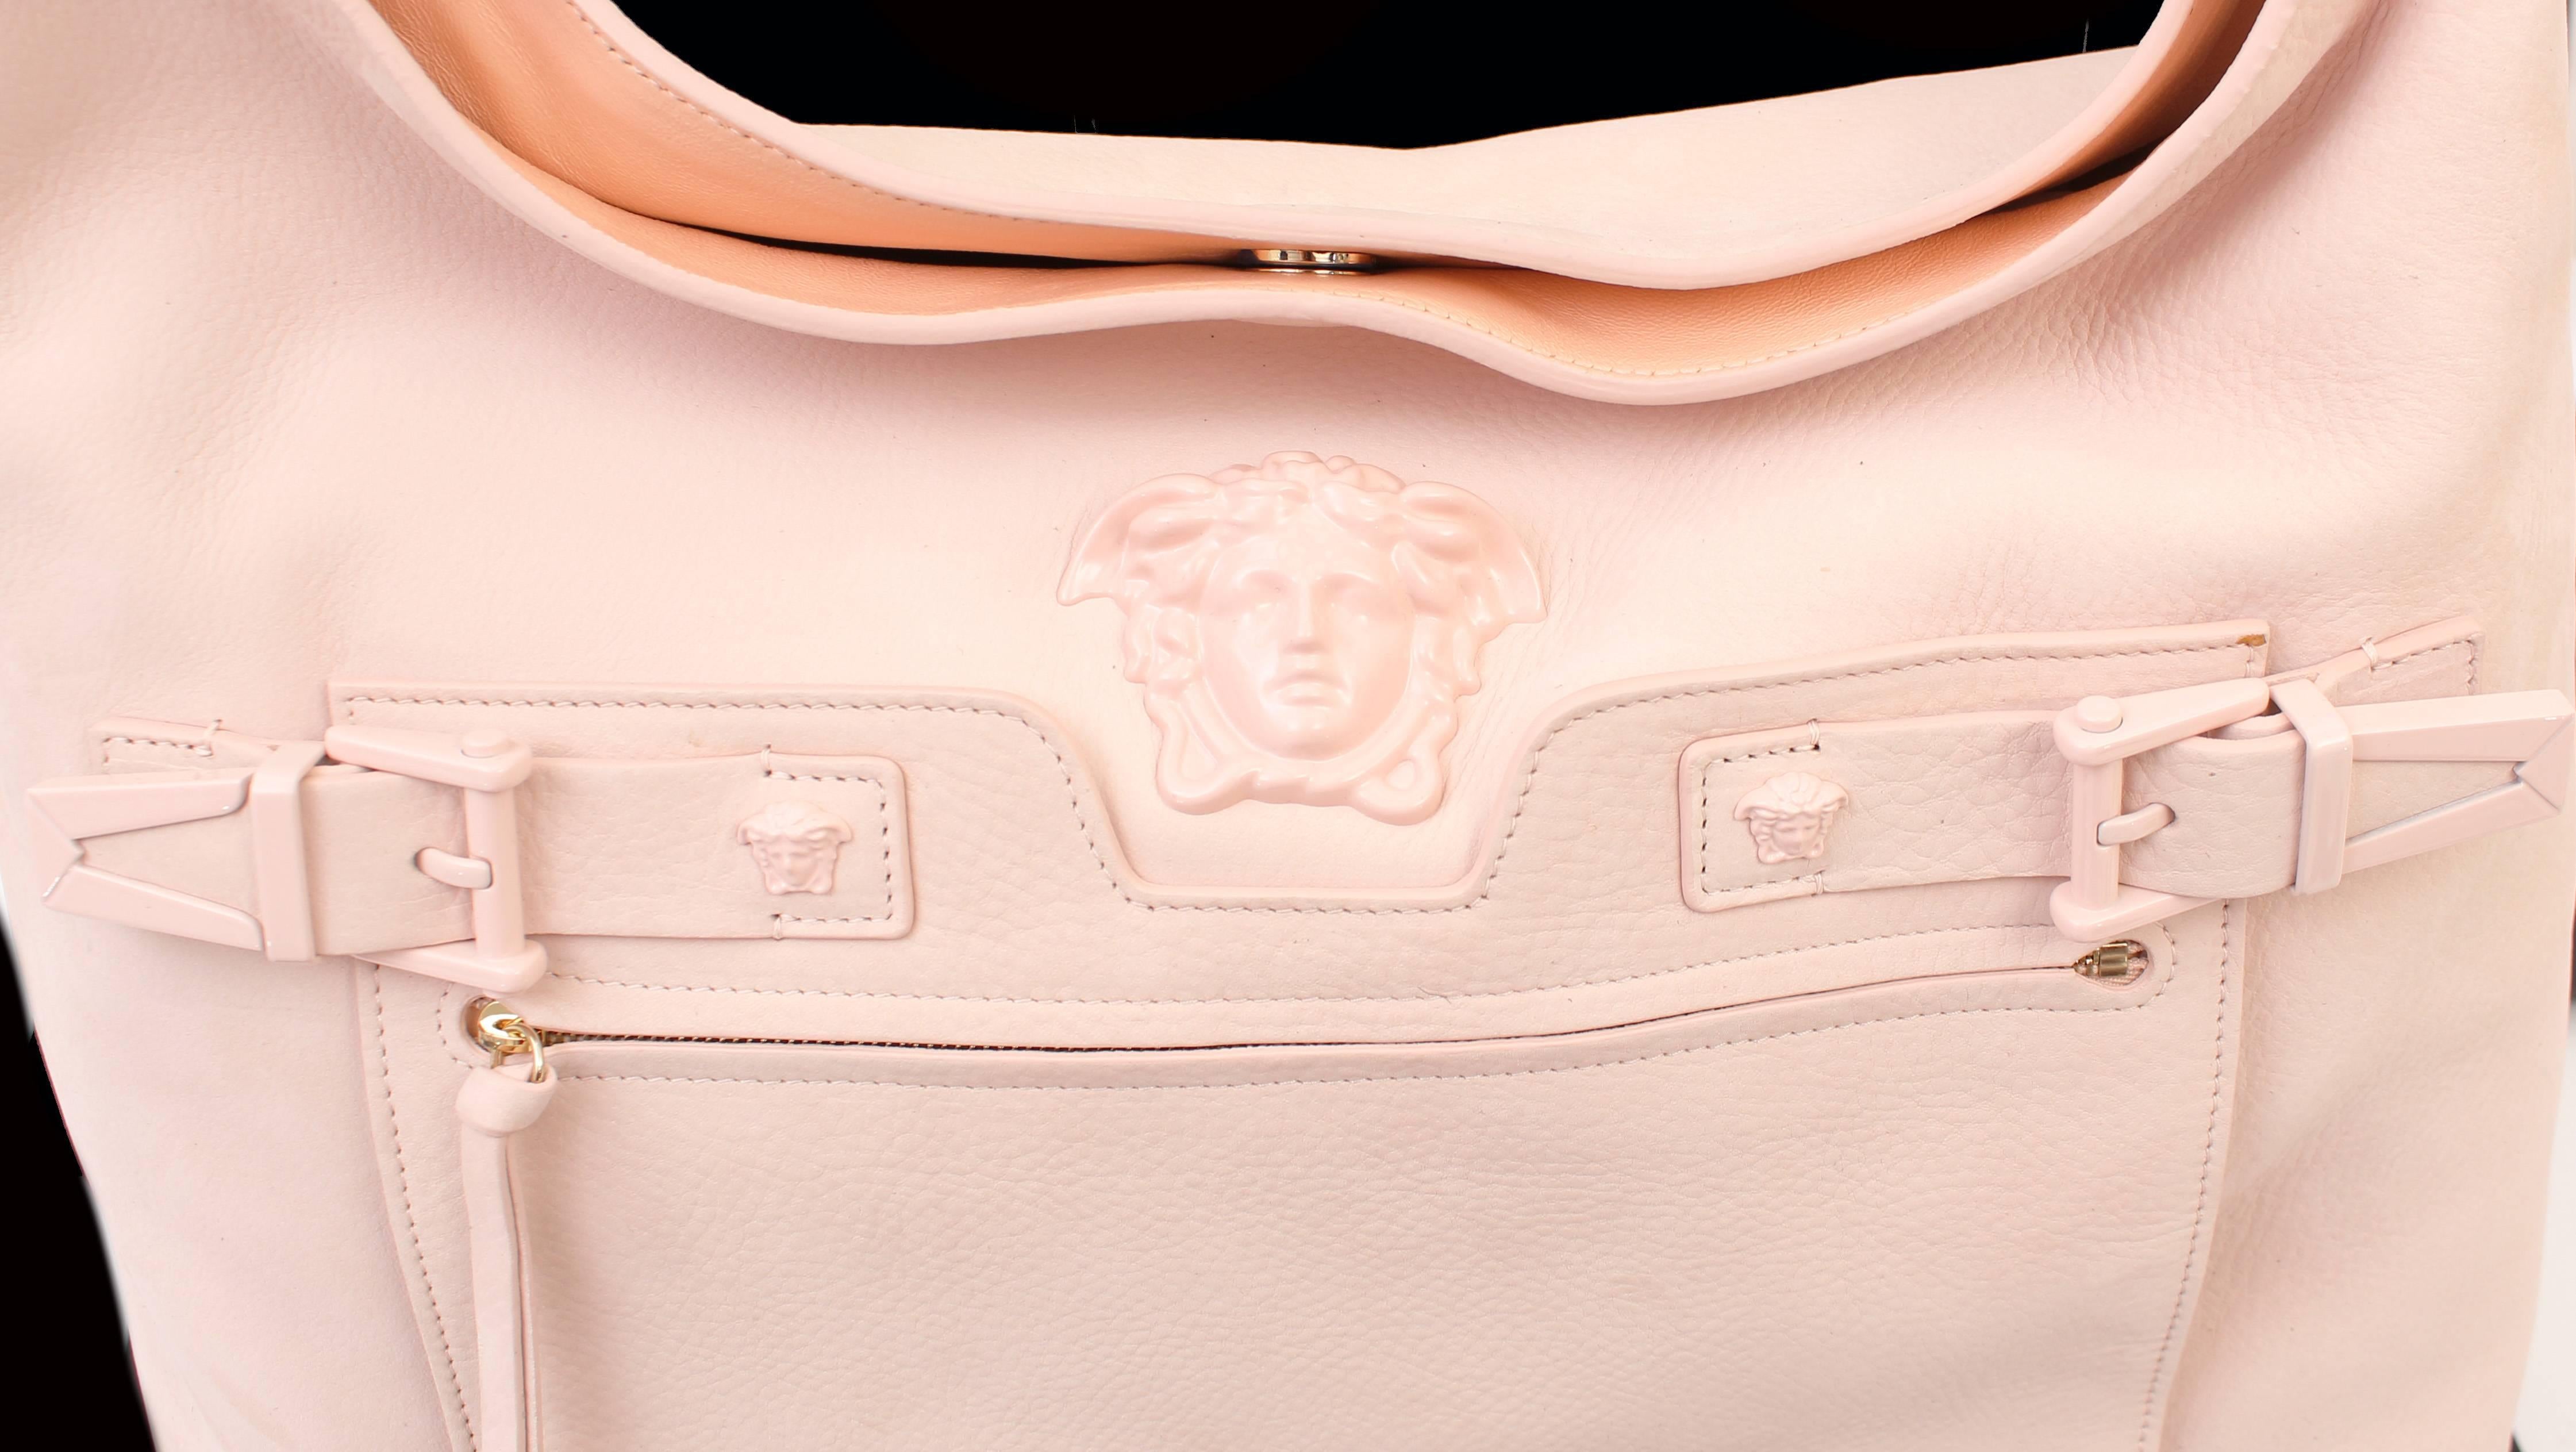 Women's New VERSACE PALAZZO OVERSIZED SHOULDER BAG IN POWDER PINK DEER LEATHER For Sale